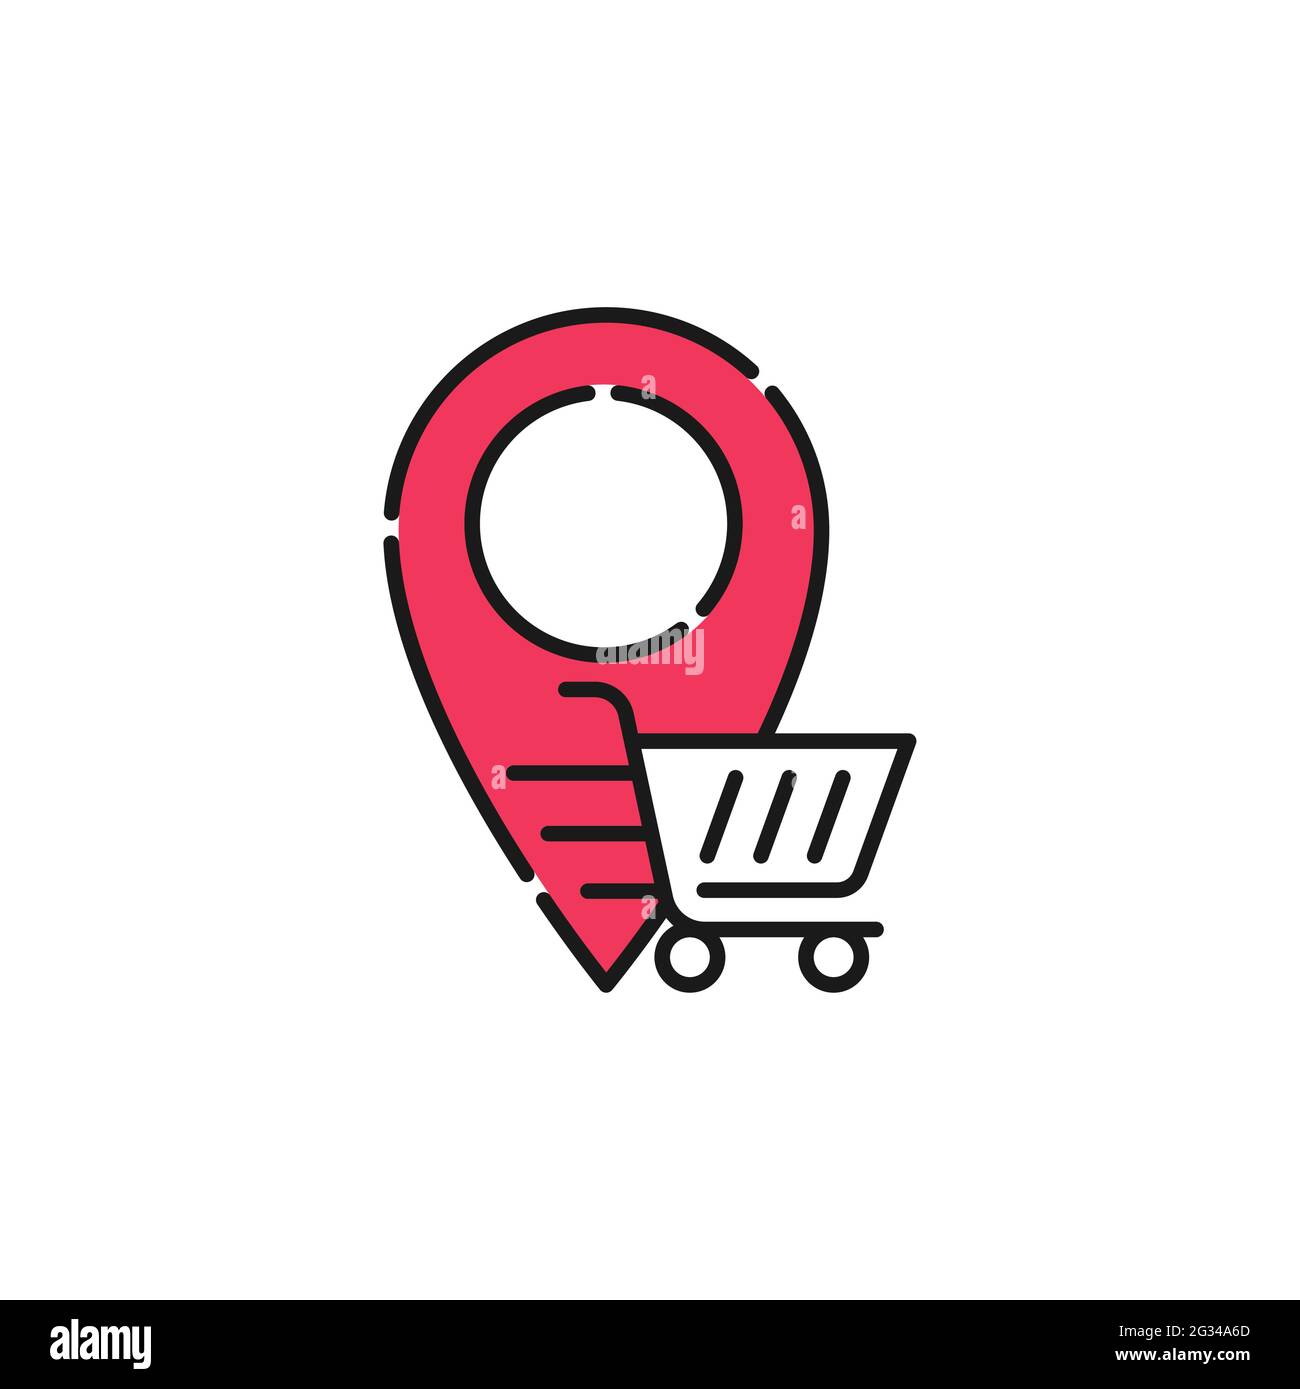 Shopping Cart with Location icon Vector Design. Shopping Cart icon with Location Pin design concept for e-commerce, online store and marketplace websi Stock Vector